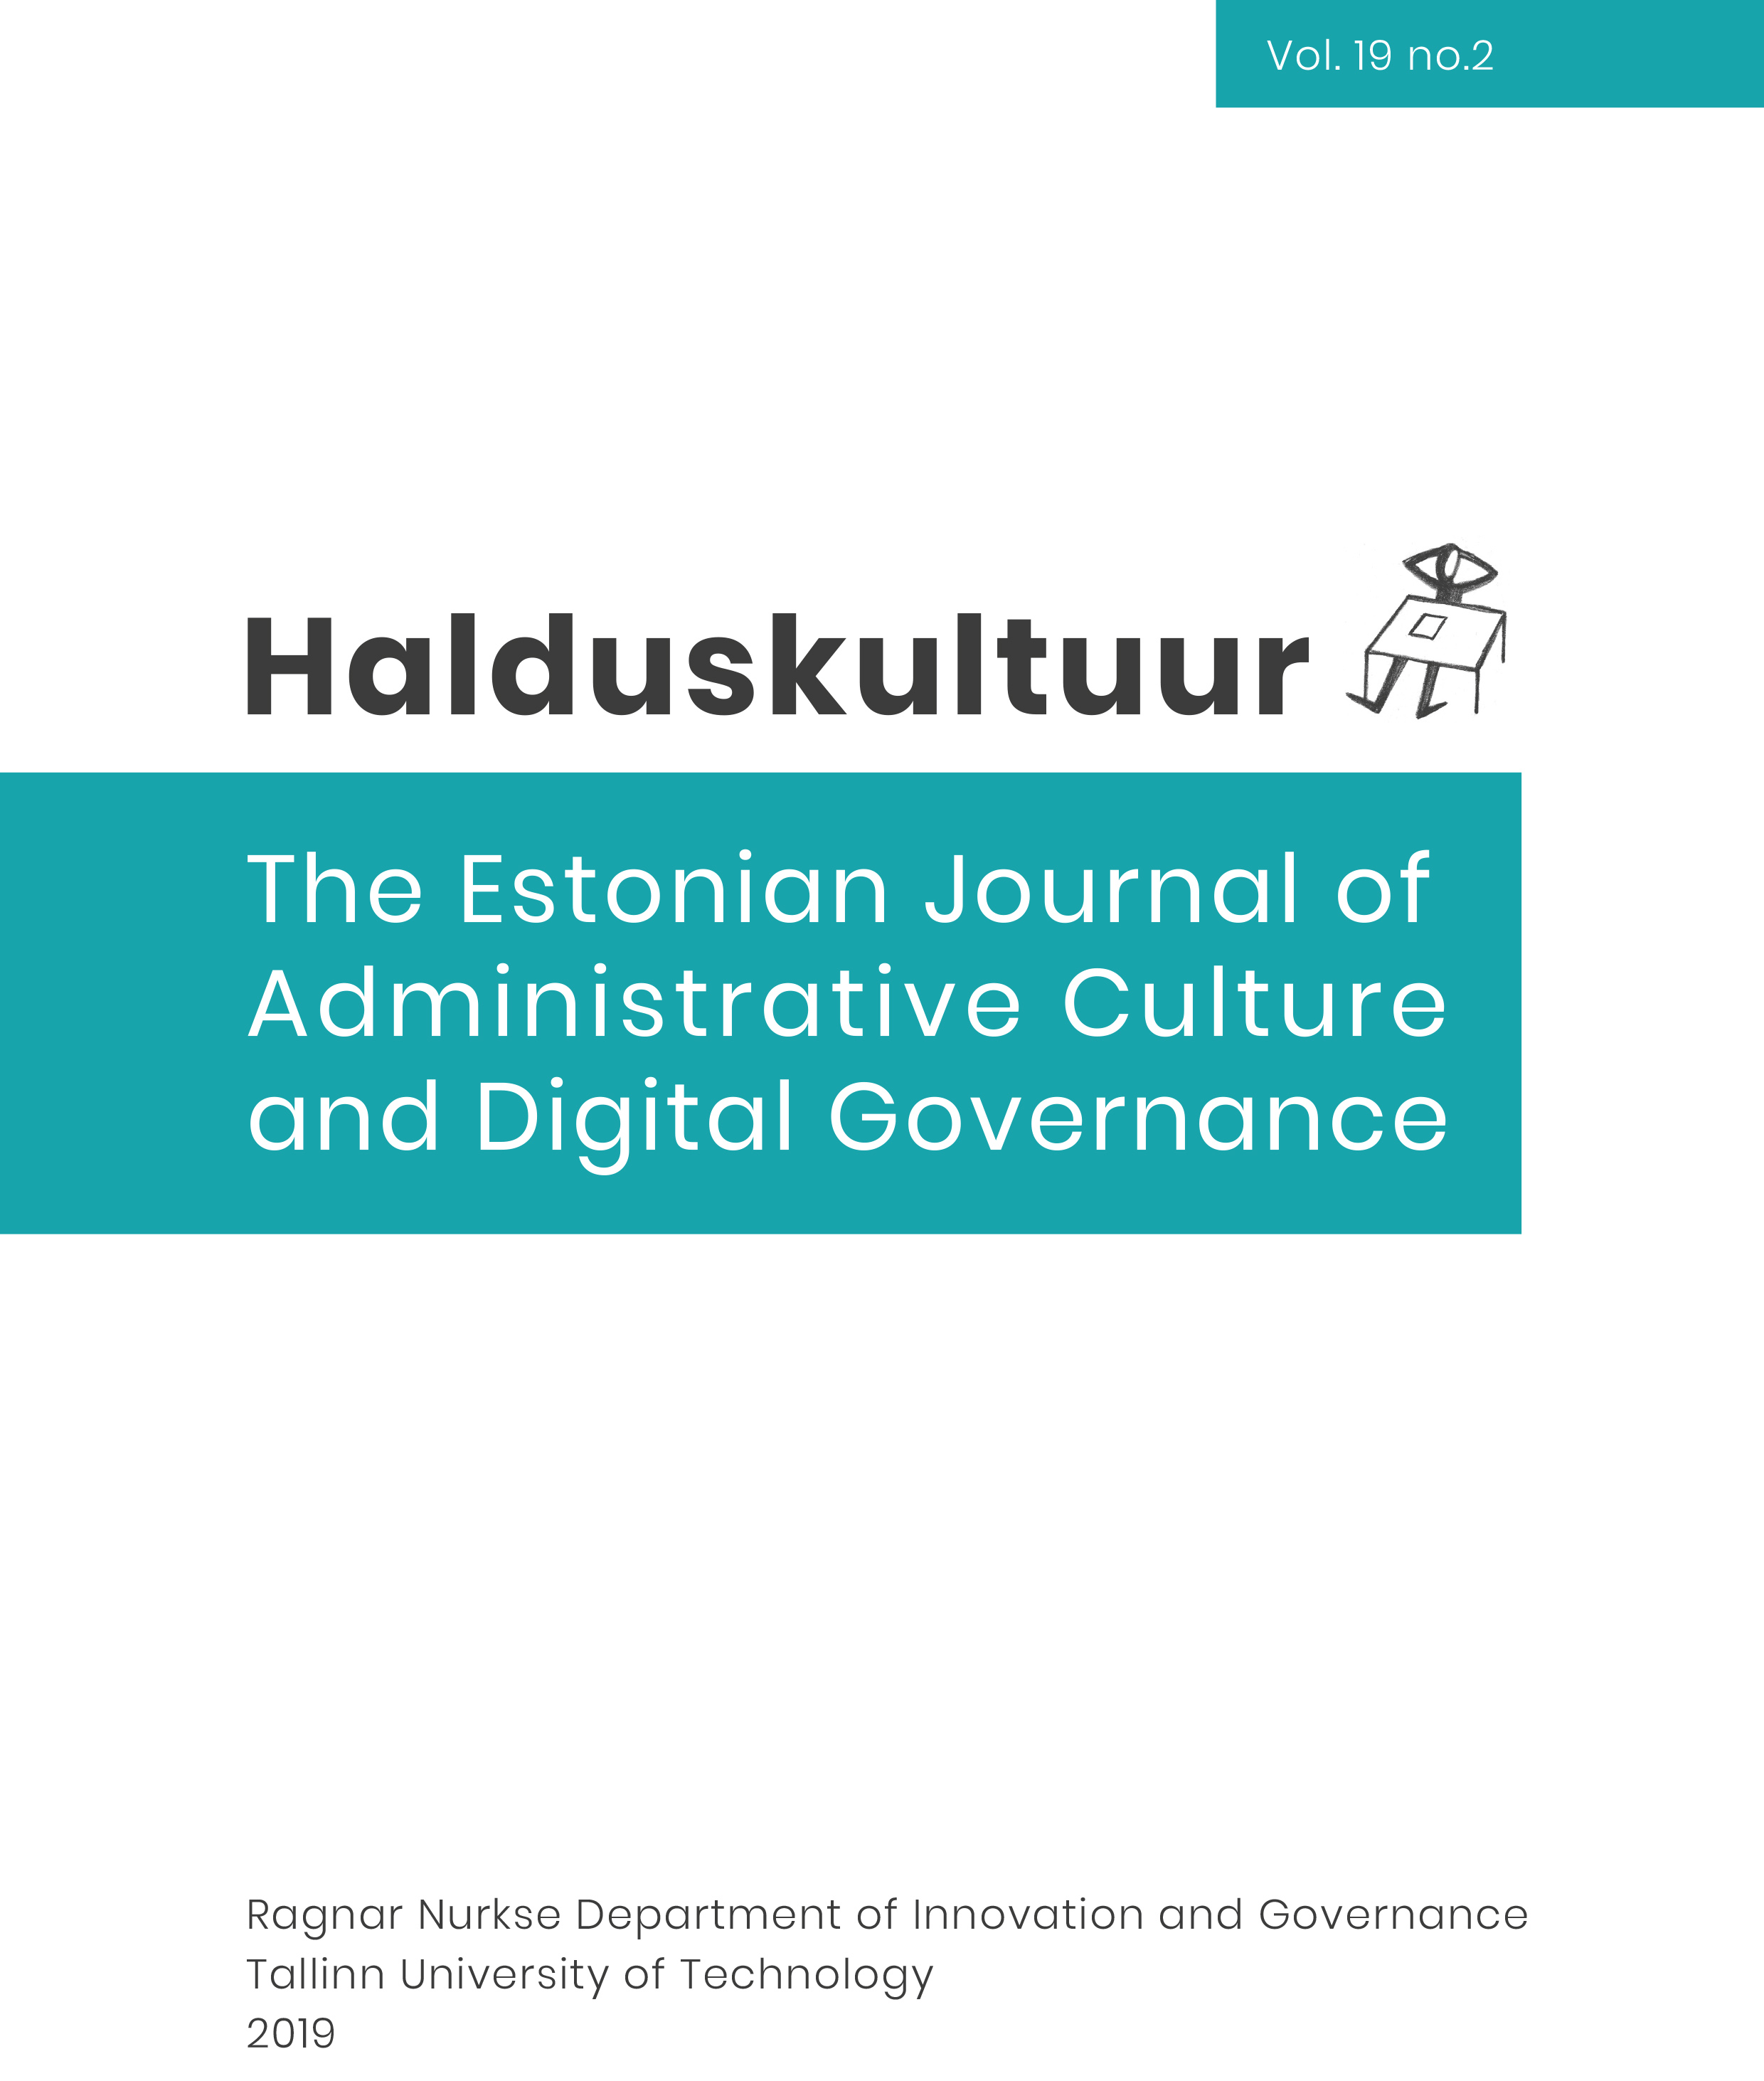 Agile Stability: Relaunching Halduskultuur – The Estonian Journal of Administrative Culture and Digital Governance Cover Image